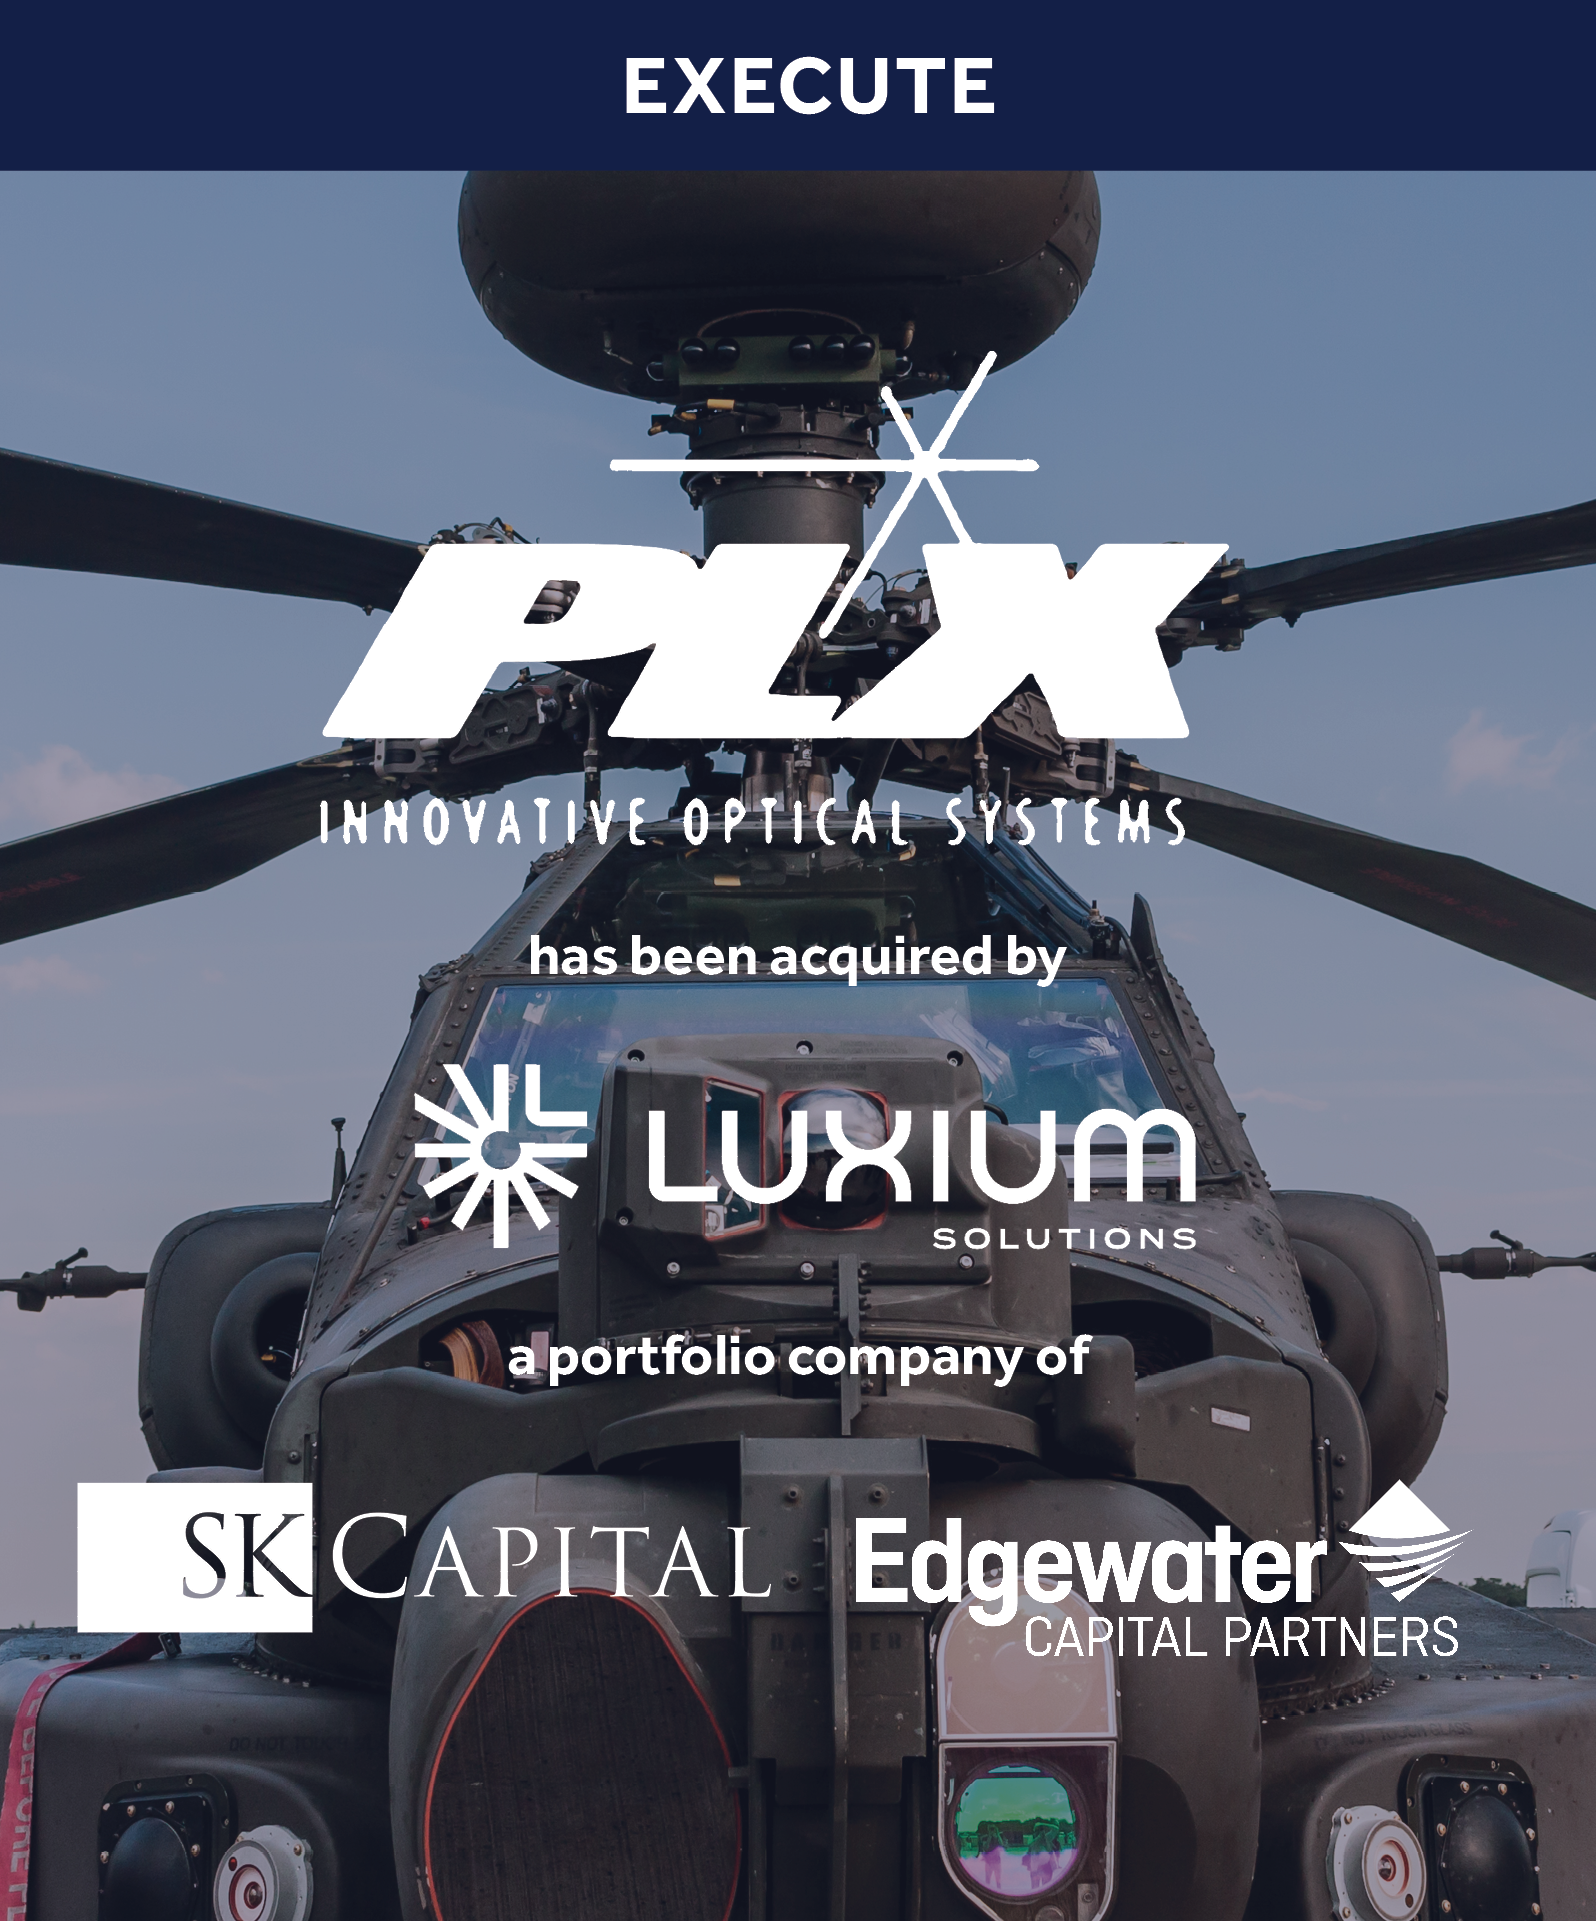 apache helicopter with deal logos for PLX over the top in white